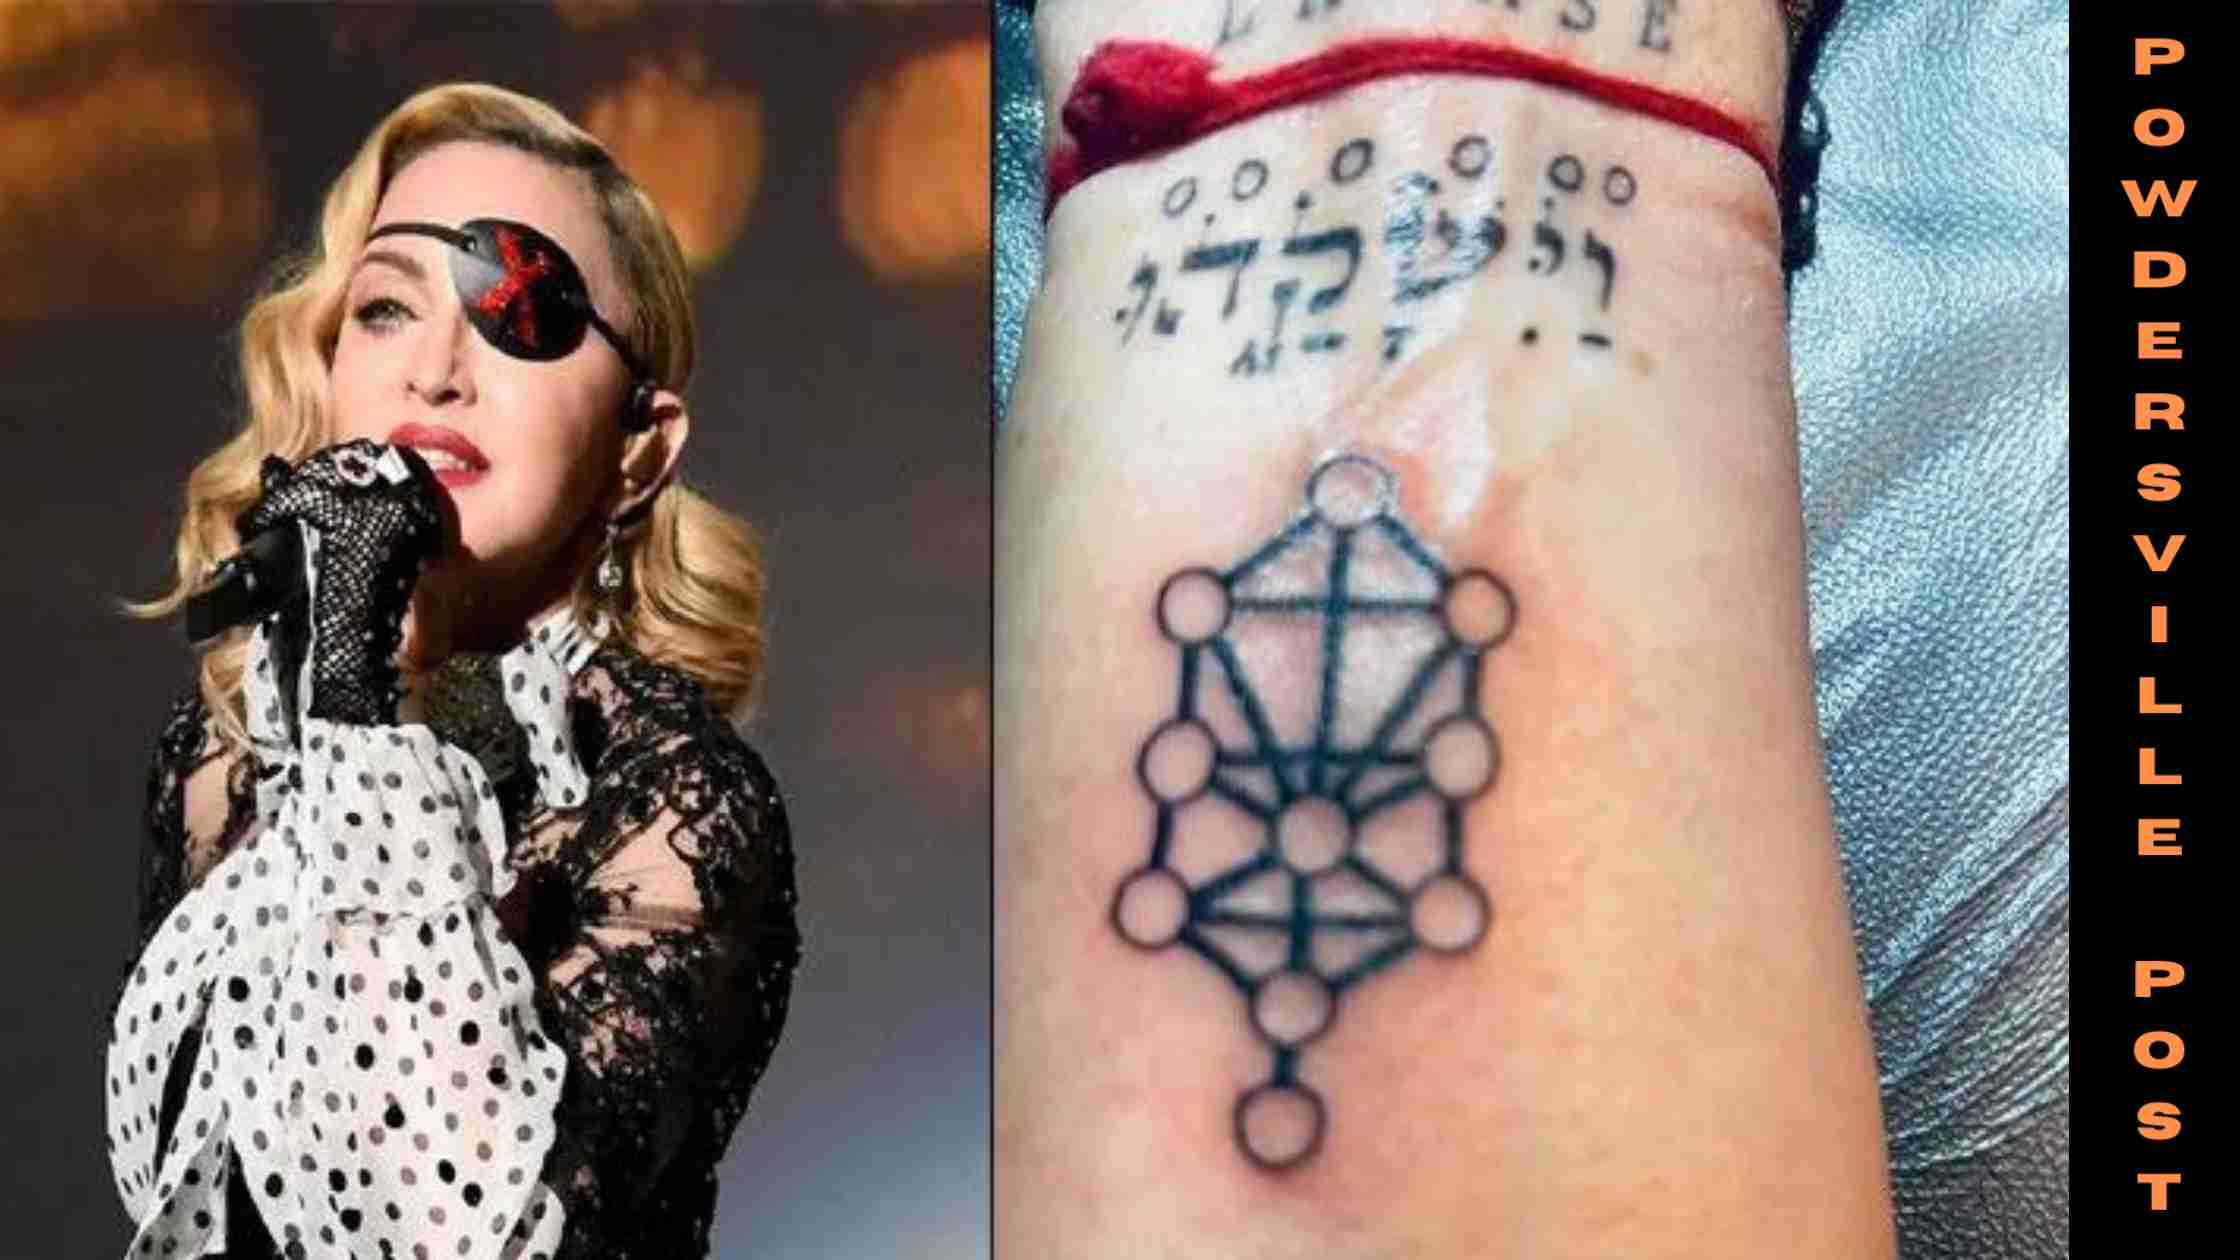 Pop Singer Madonna Inked New Tattoo Featuring A Design From The Kabbalah Book Ten Luminous Emanations On The Inside Of Her Wrist